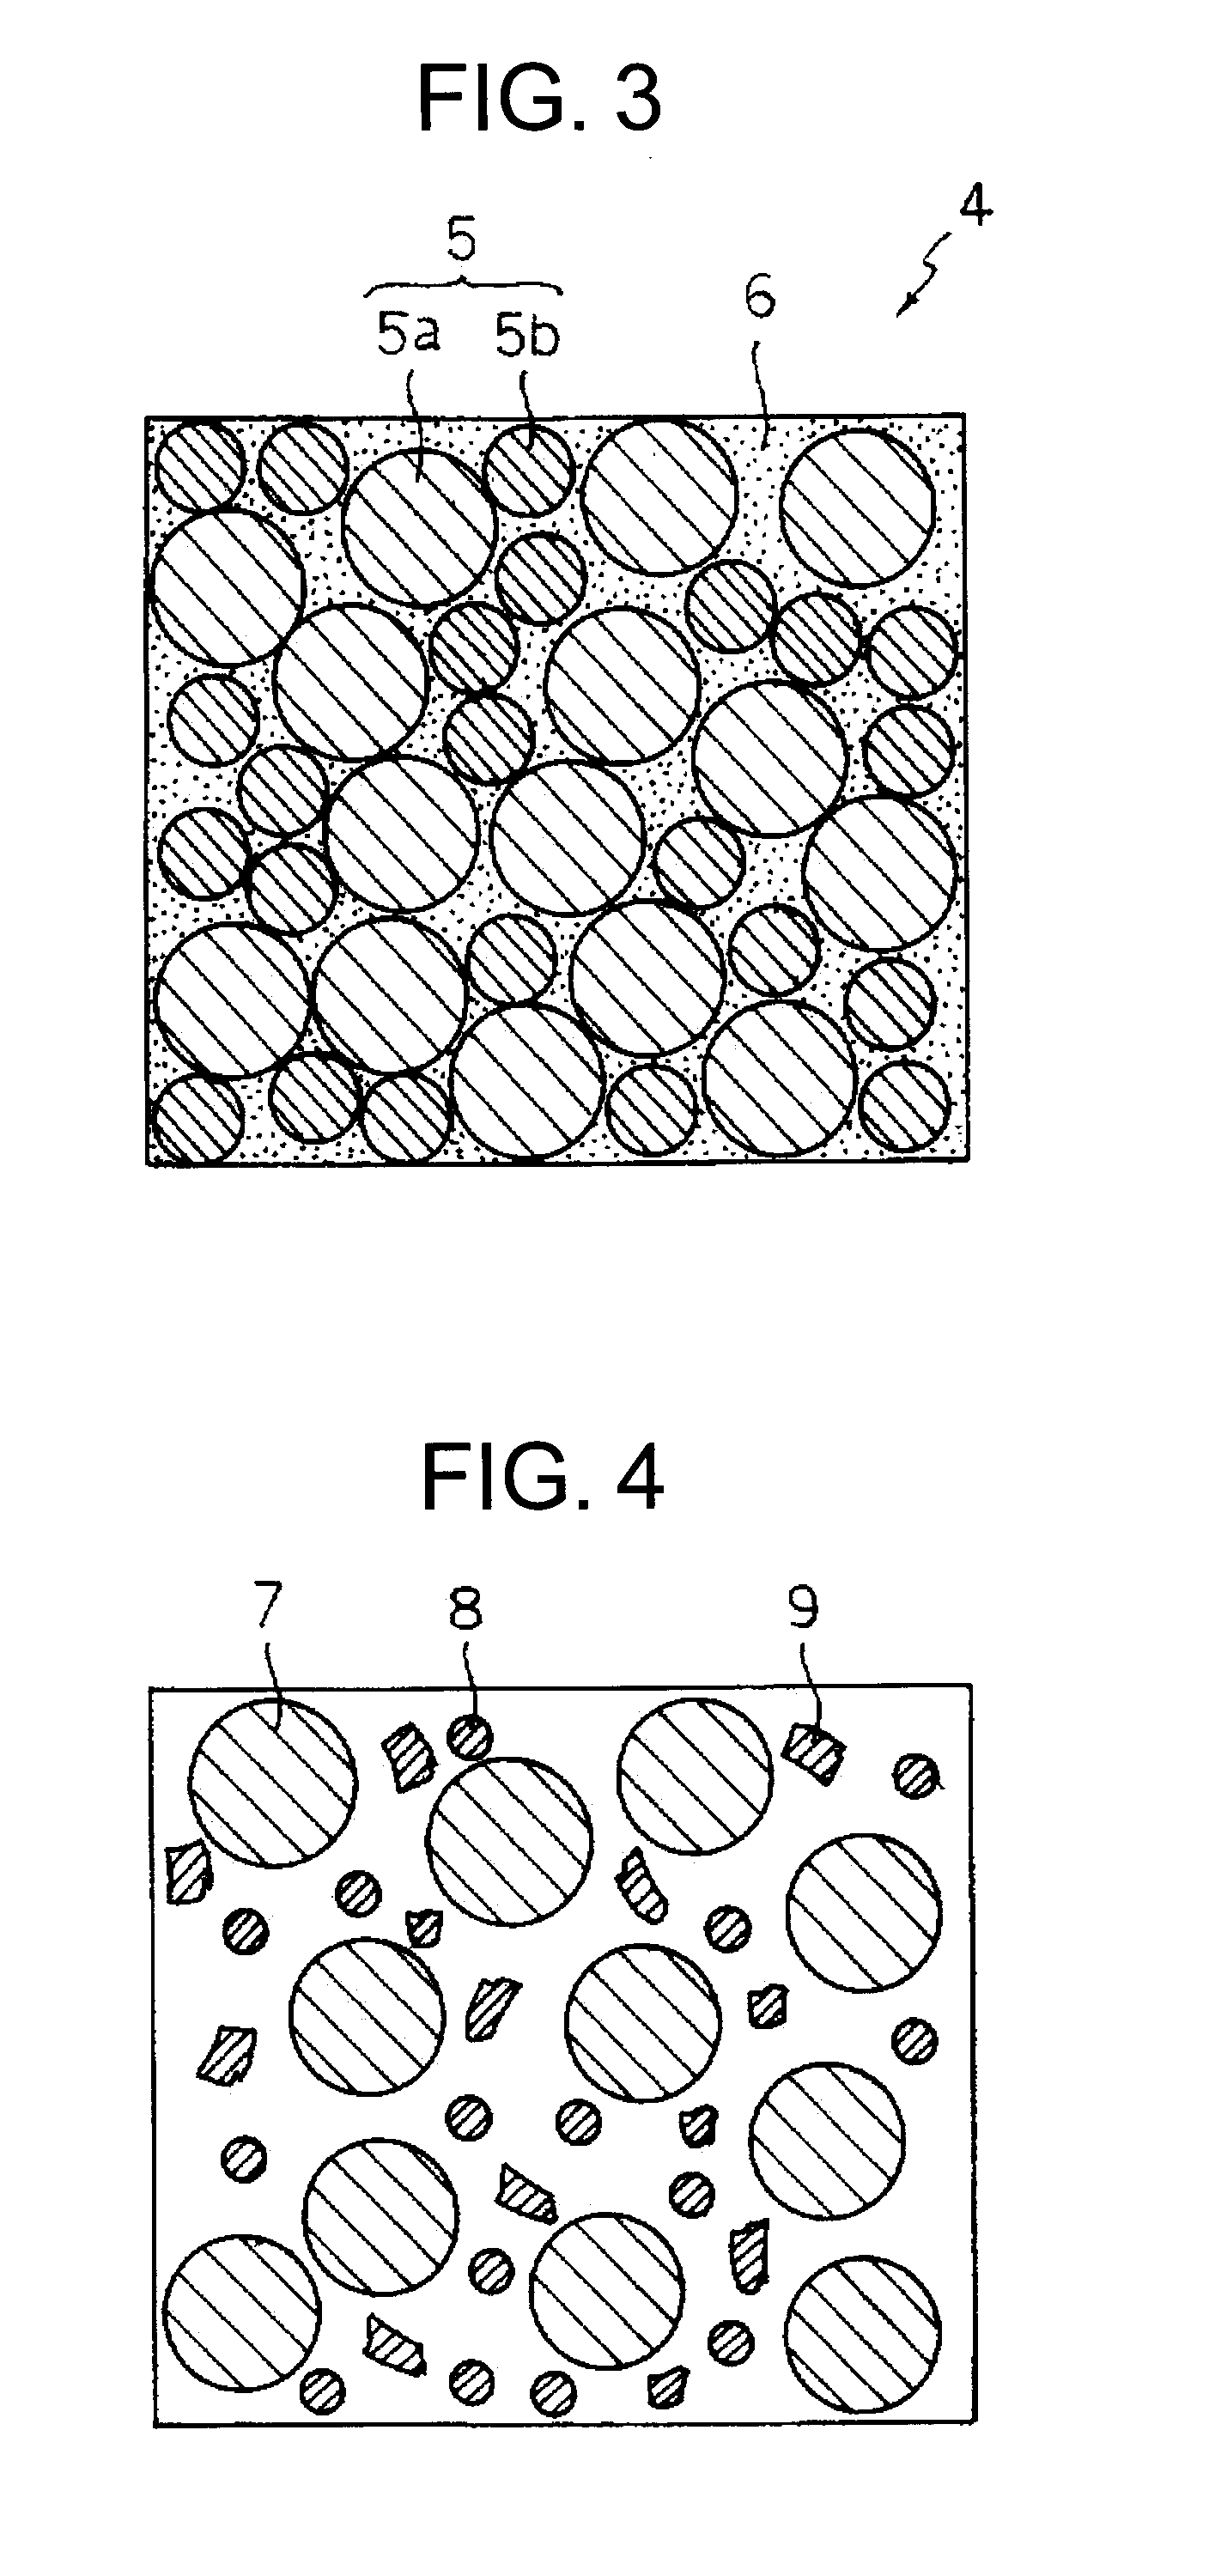 Ceramics composite member and method of producing the same